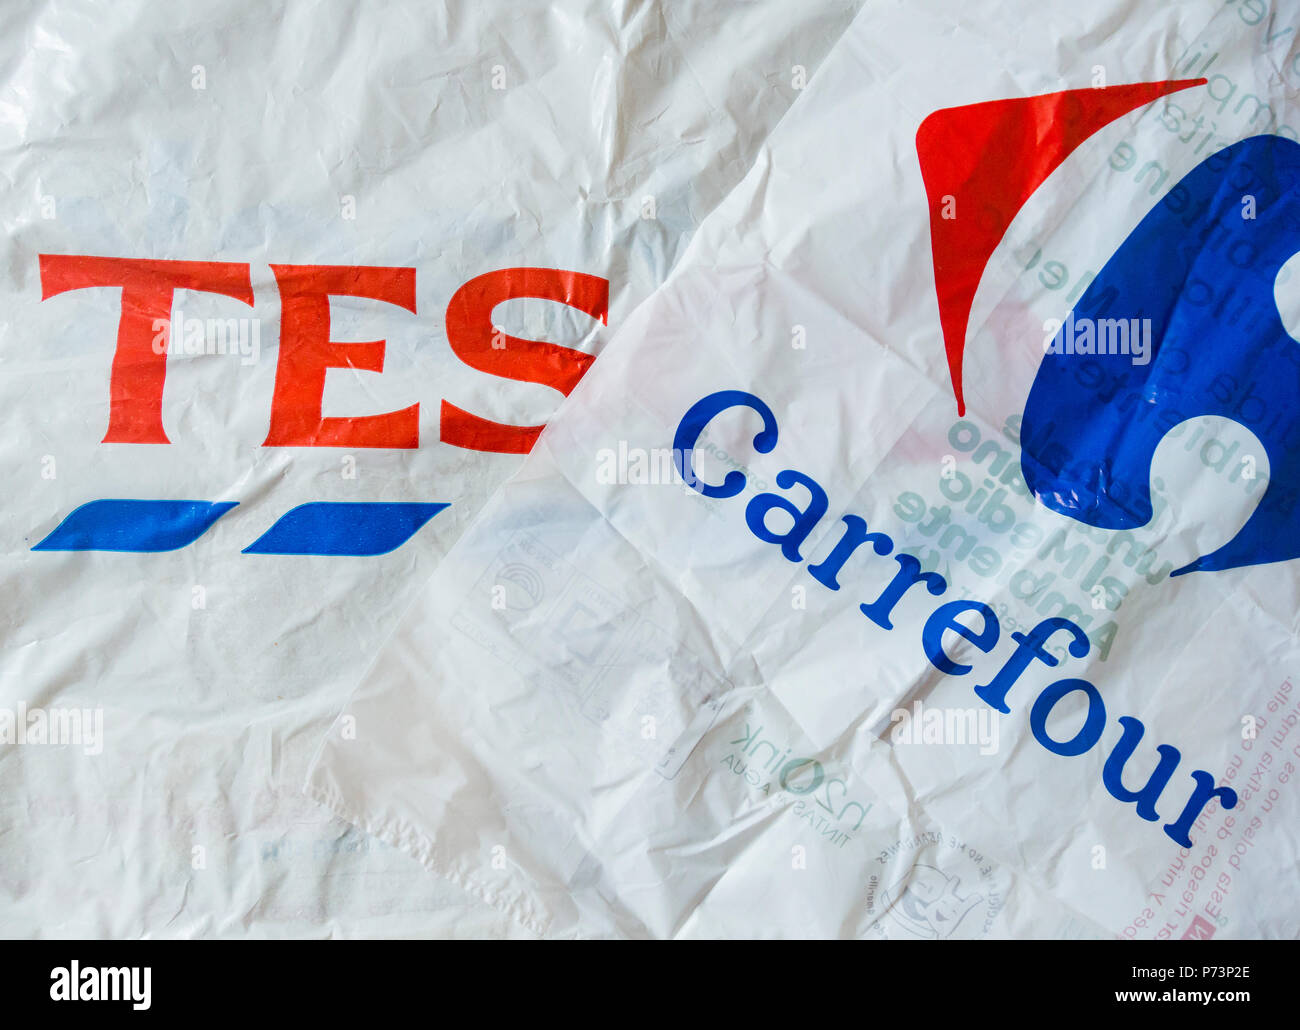 Tesco and Carrefour supermaket plastic bags Stock Photo